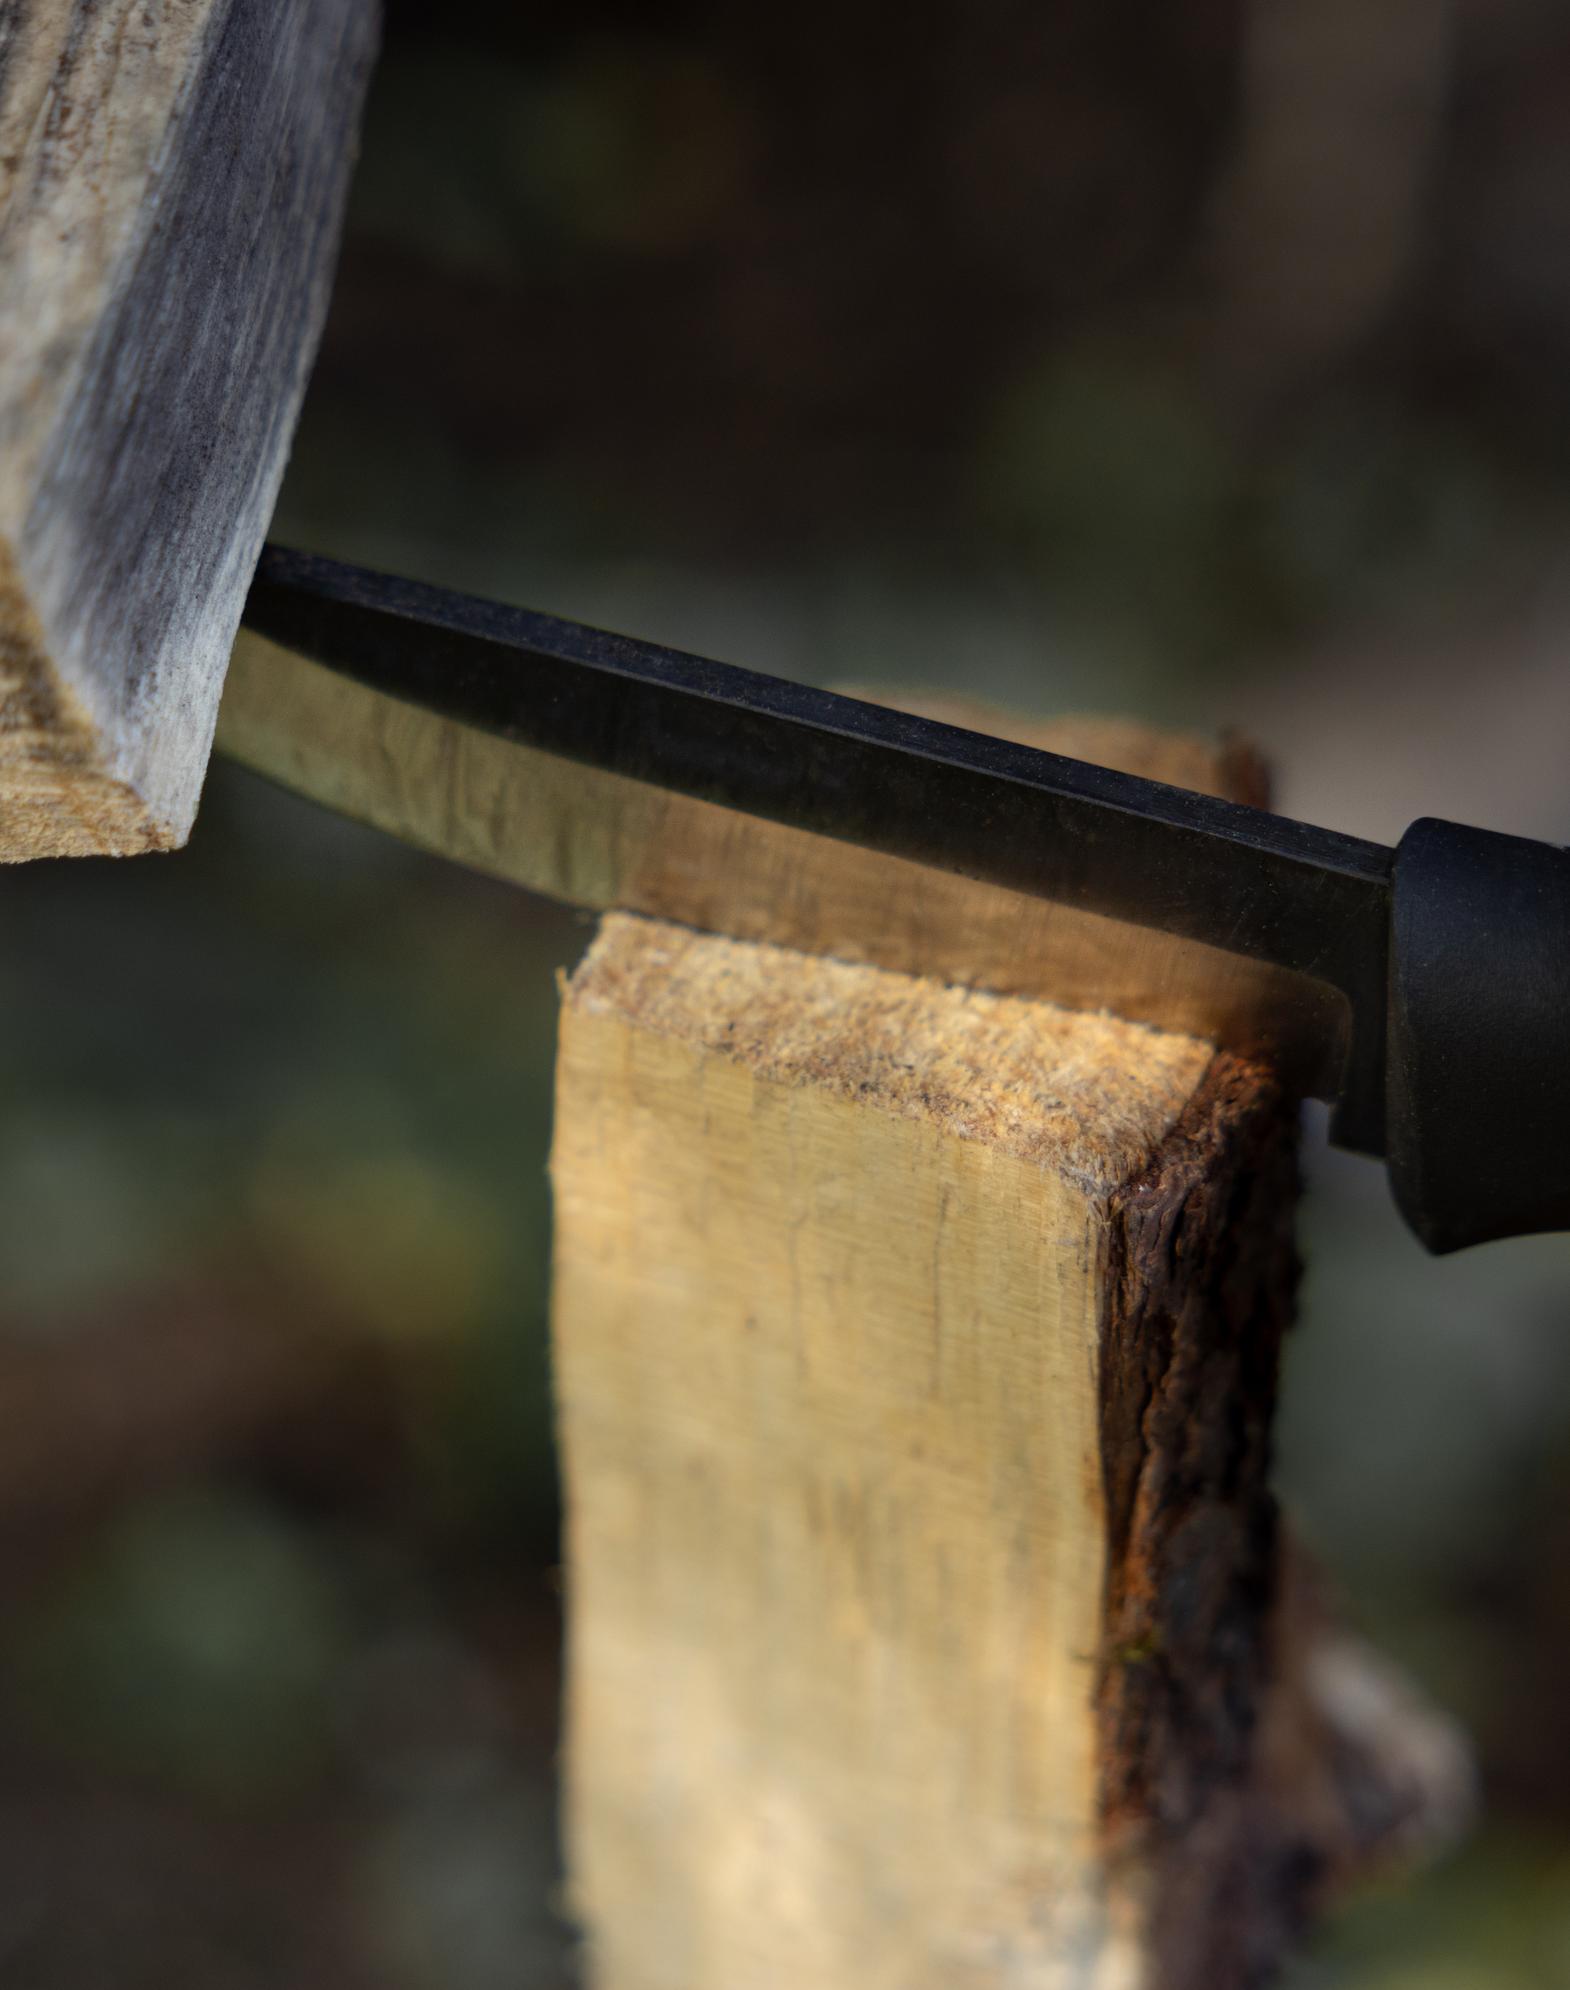 M95 Ranger Puukko - Designed by J-P. Peltonen, a friend of the wilderness and a professional's tool.